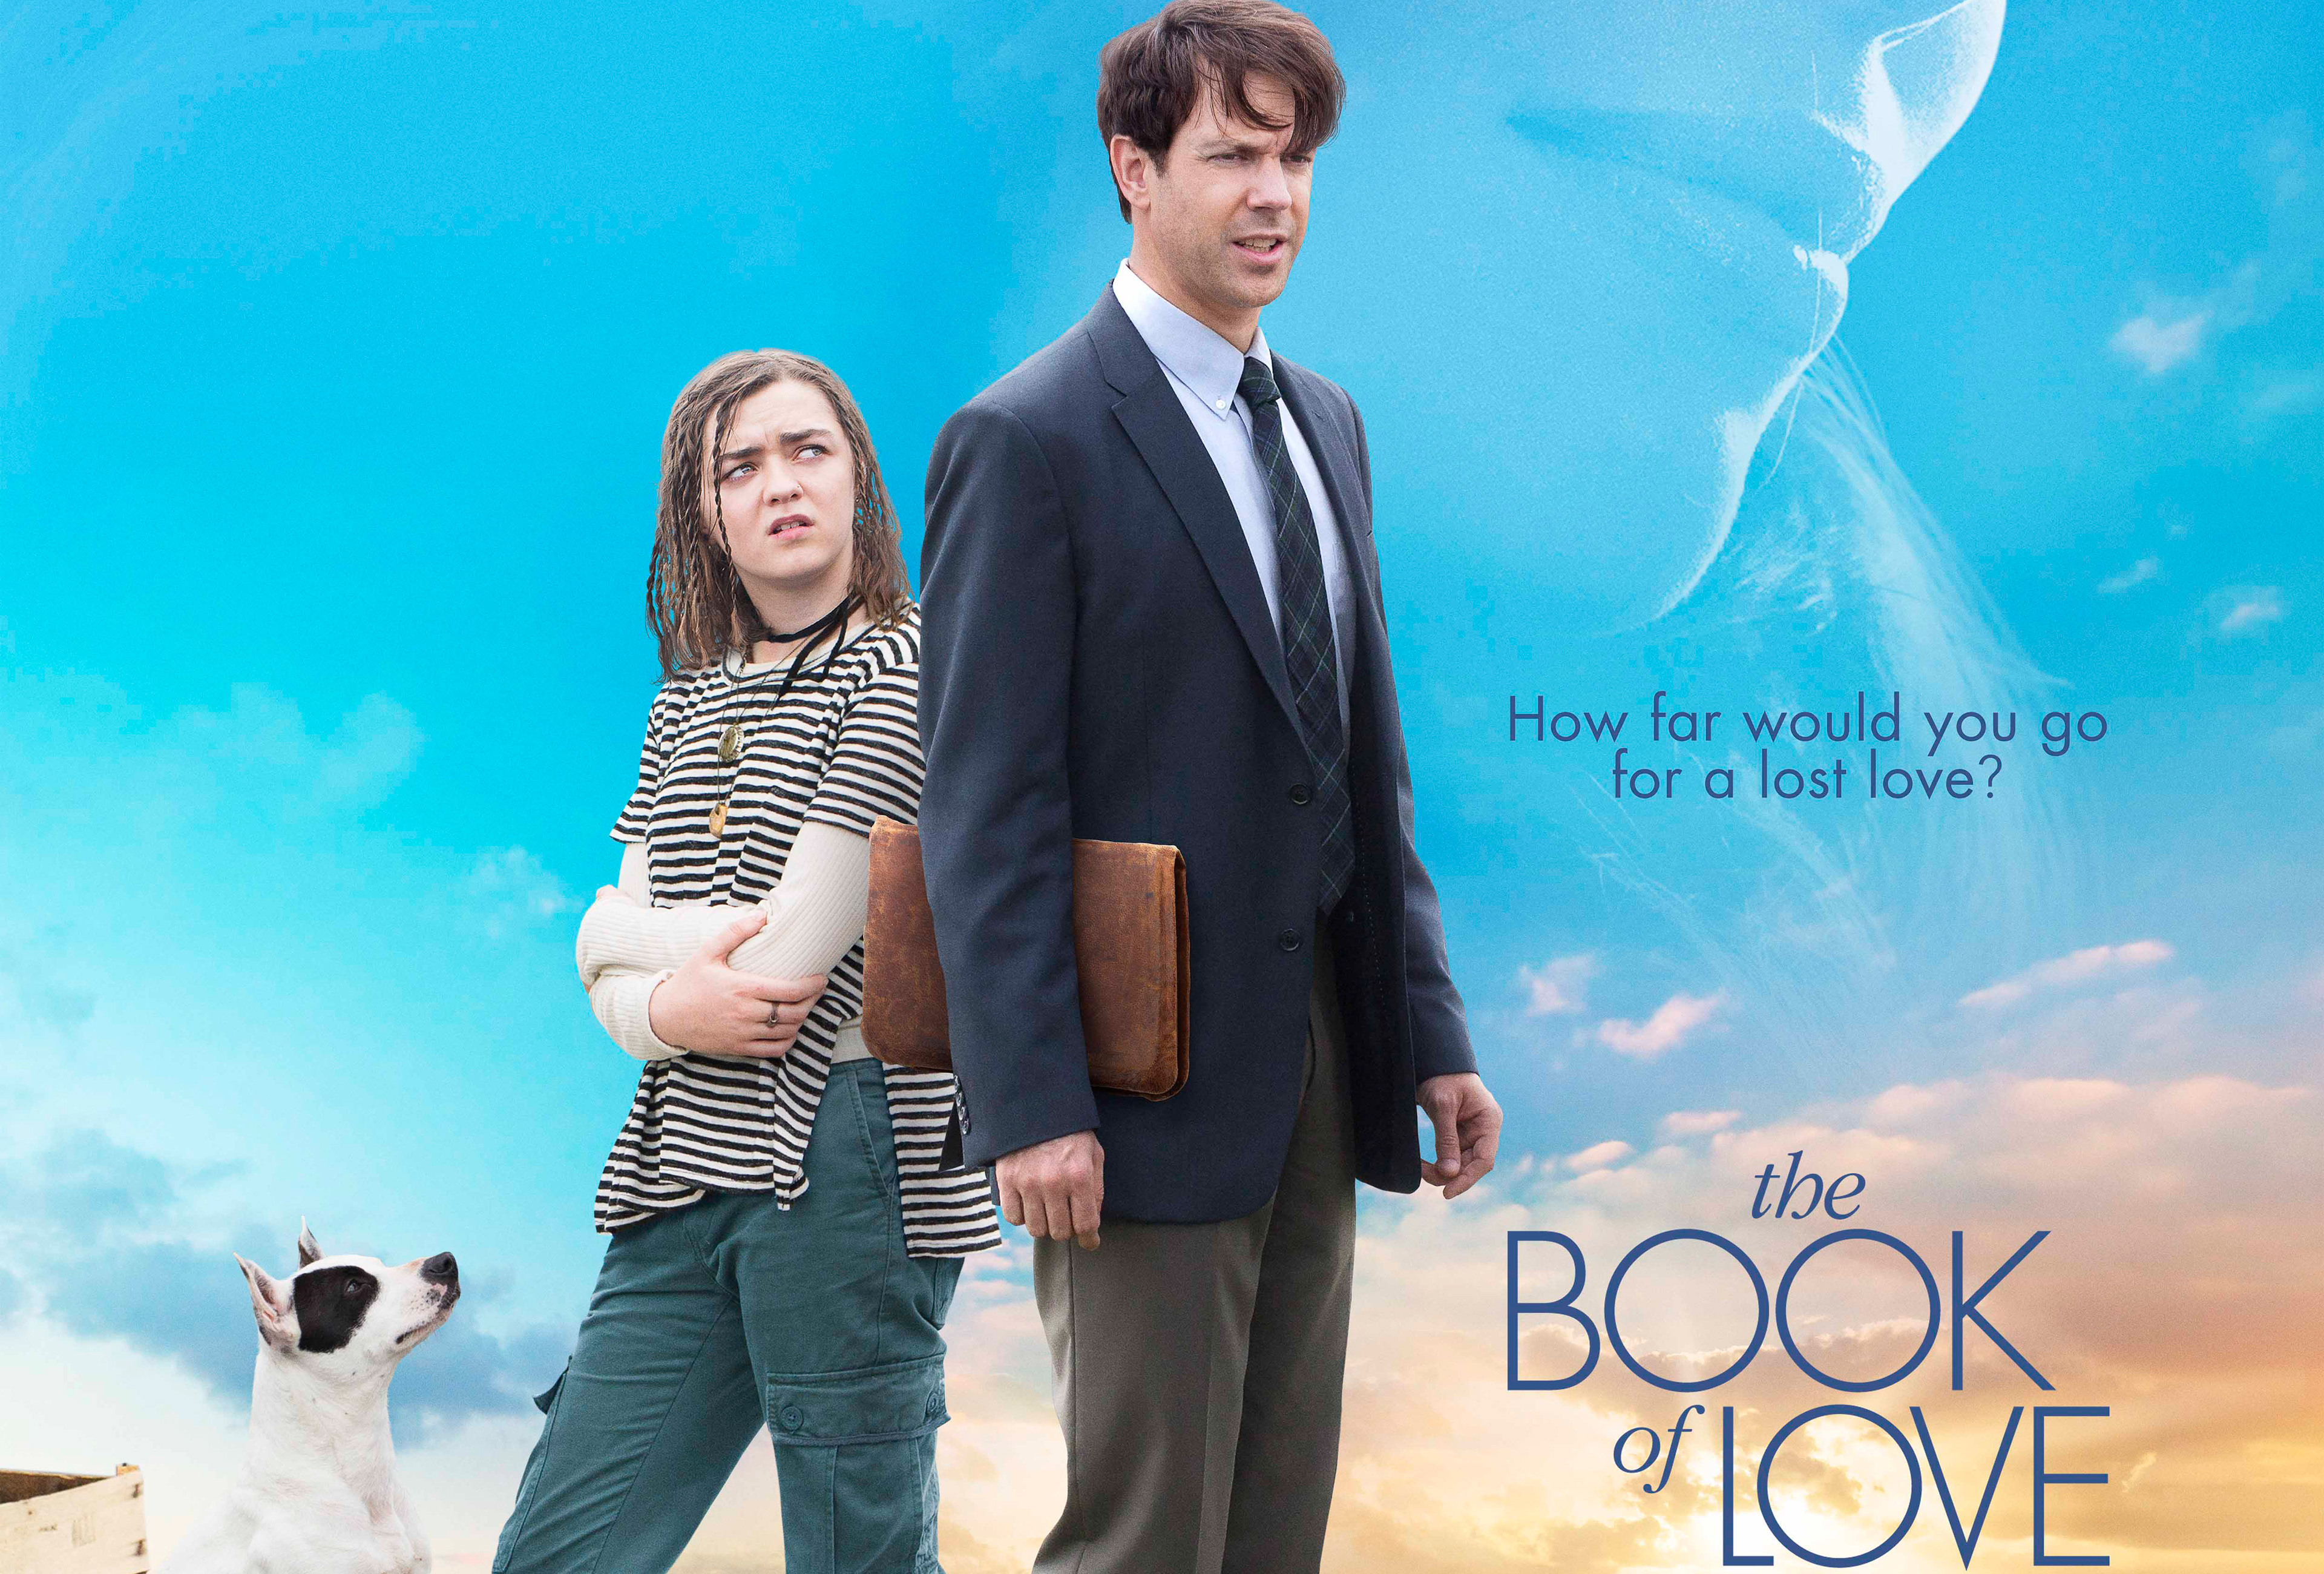 The movie was the book. Книга любви 2016. Book of Love 2004.